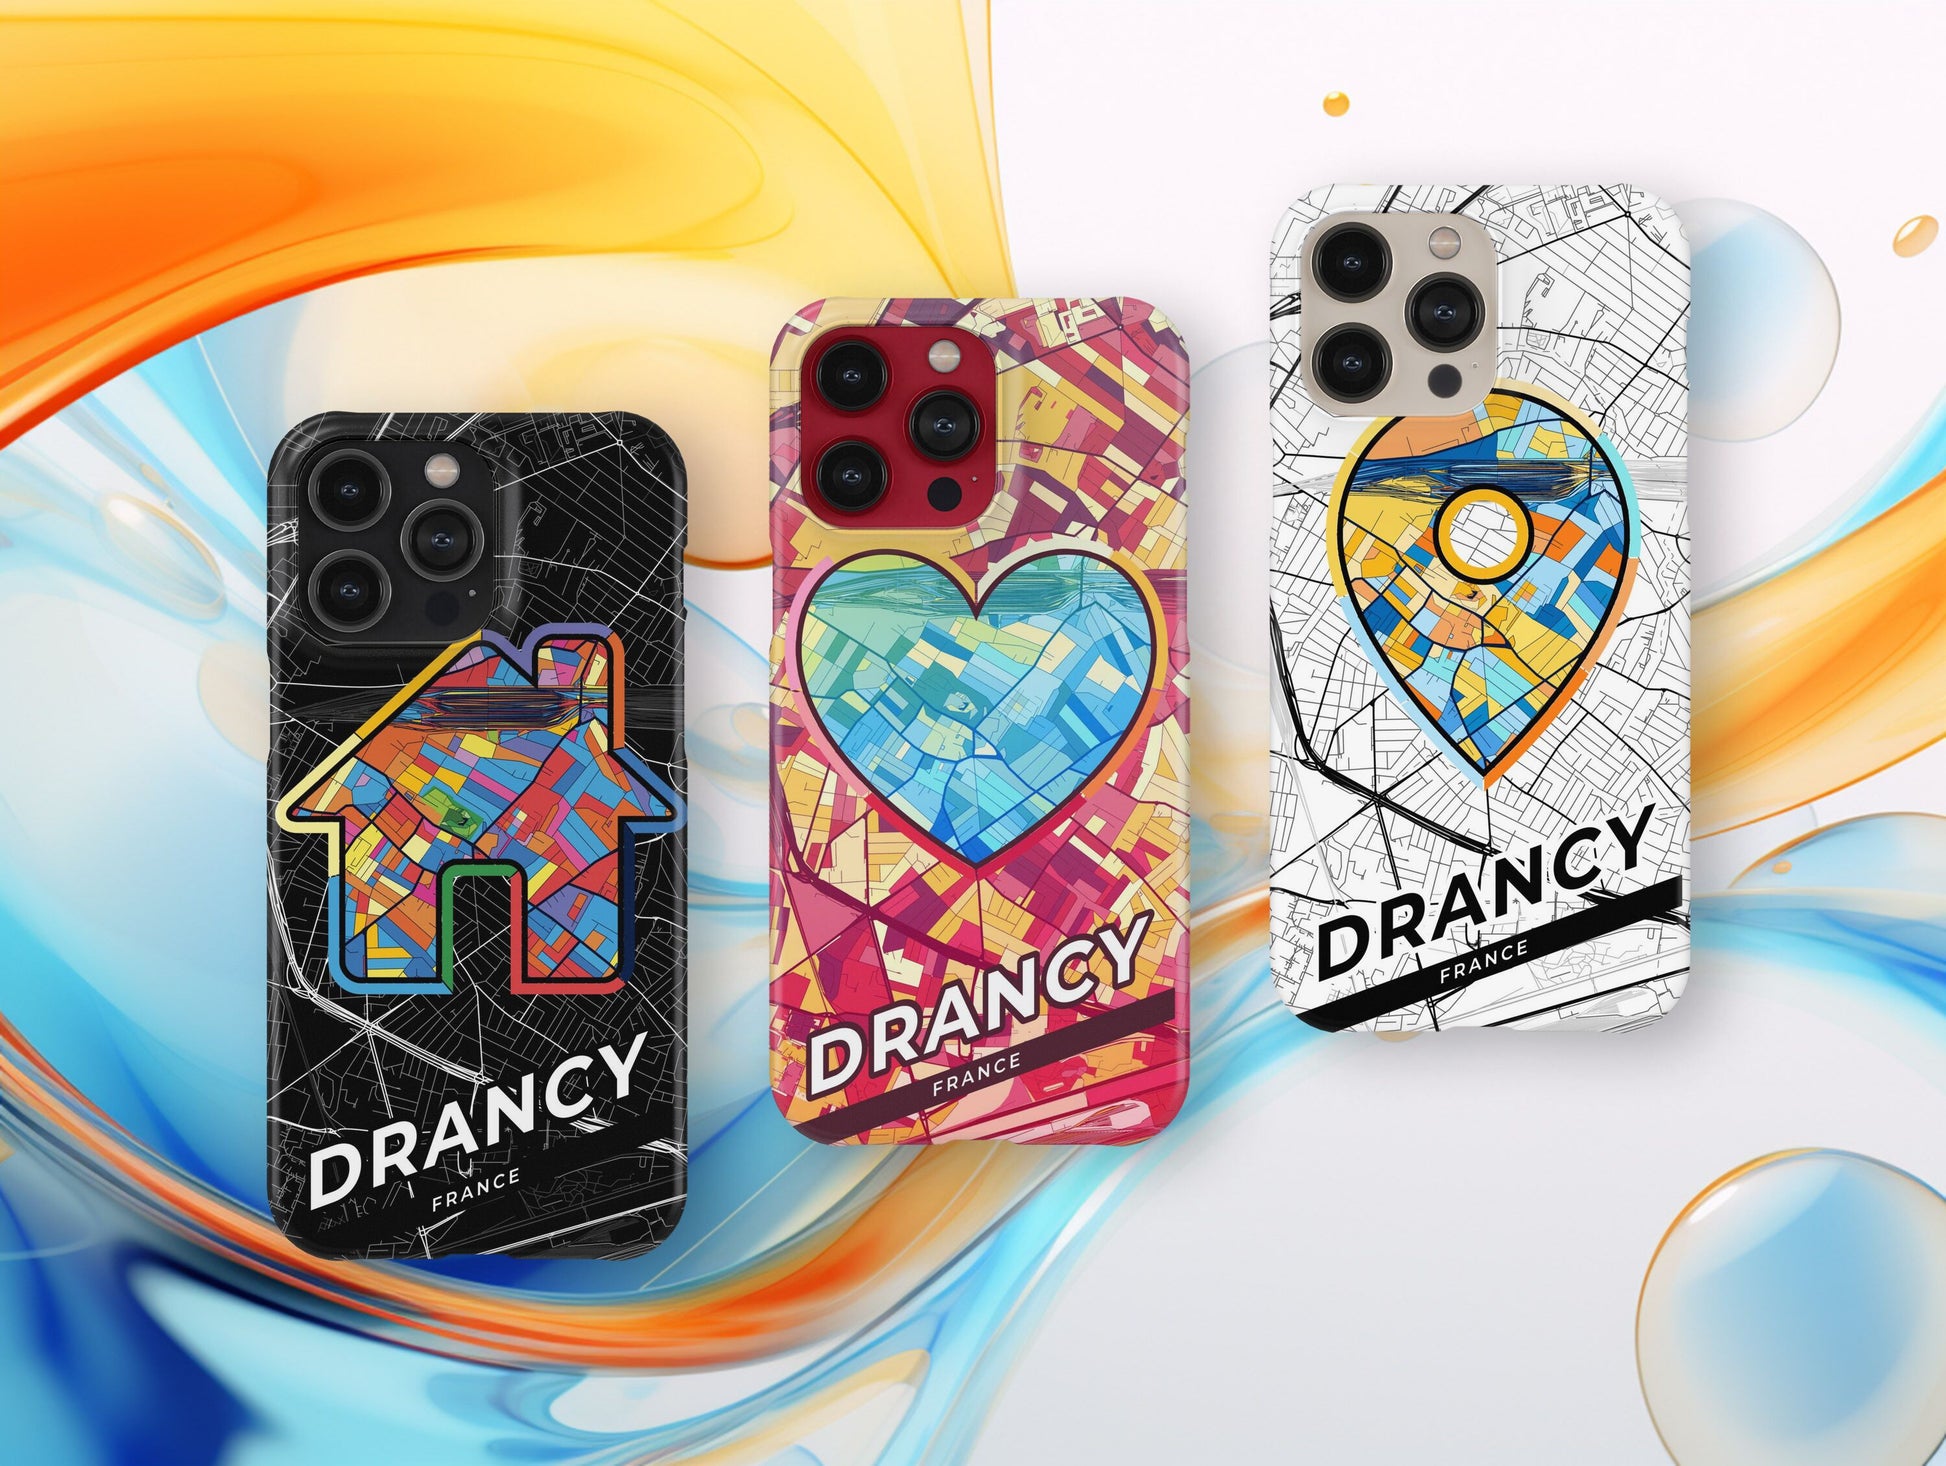 Drancy France slim phone case with colorful icon. Birthday, wedding or housewarming gift. Couple match cases.